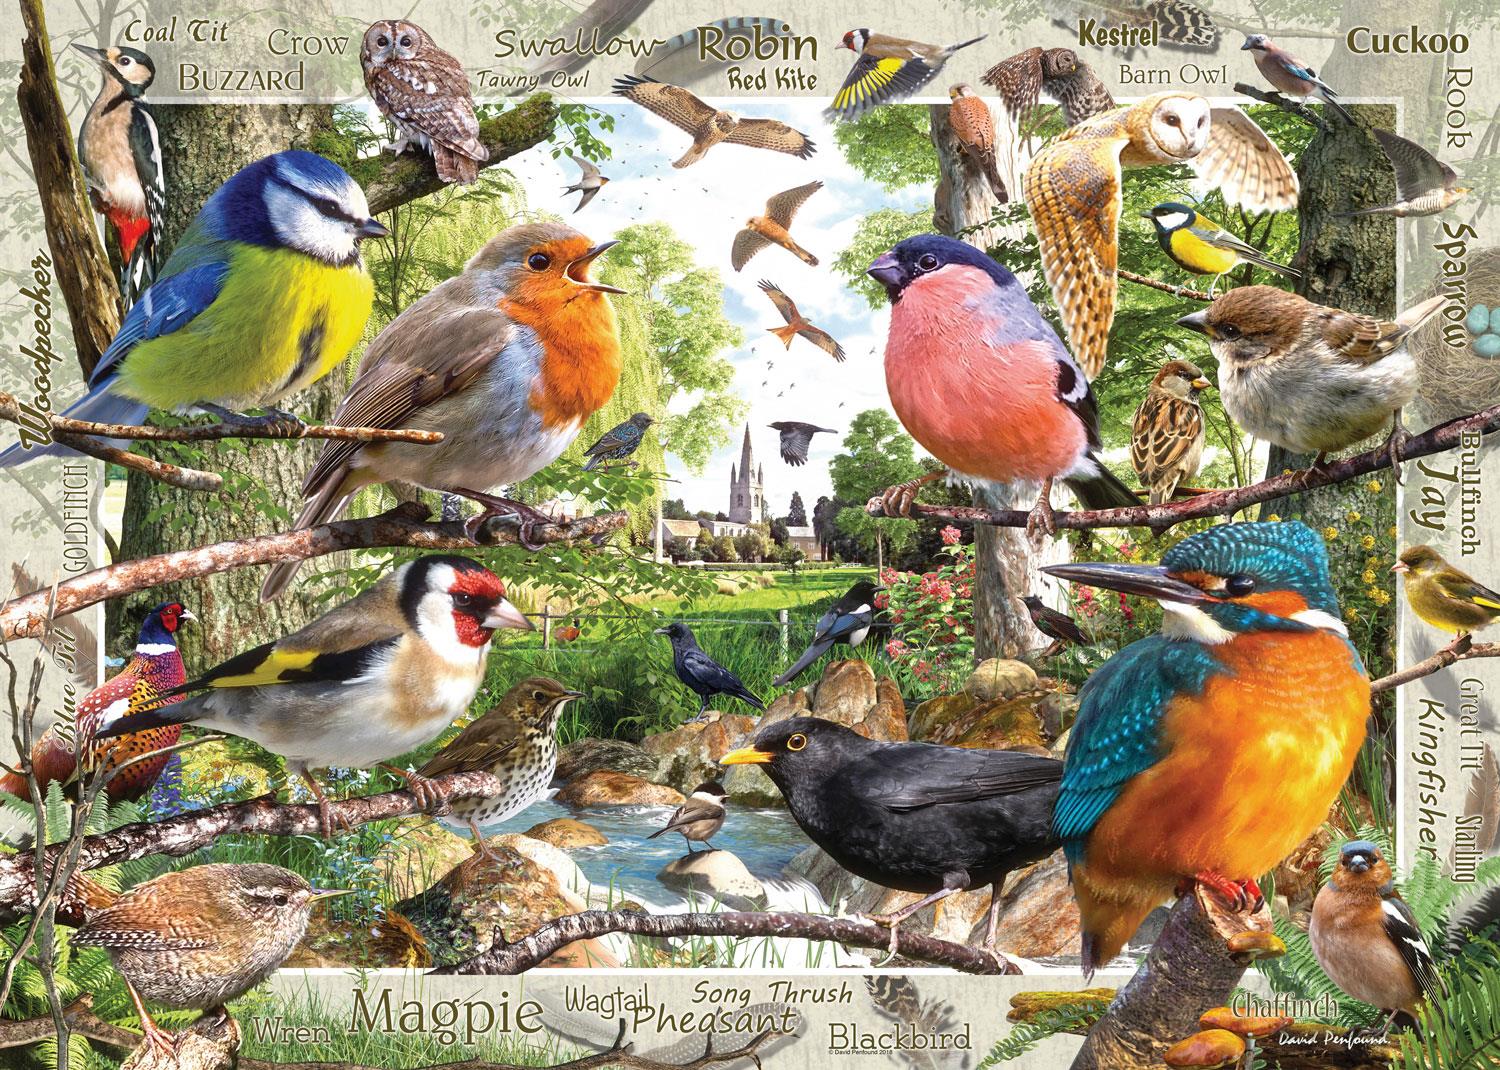 Ravensburger Our Feathered Friends Jigsaw Puzzle (1000 Pieces)